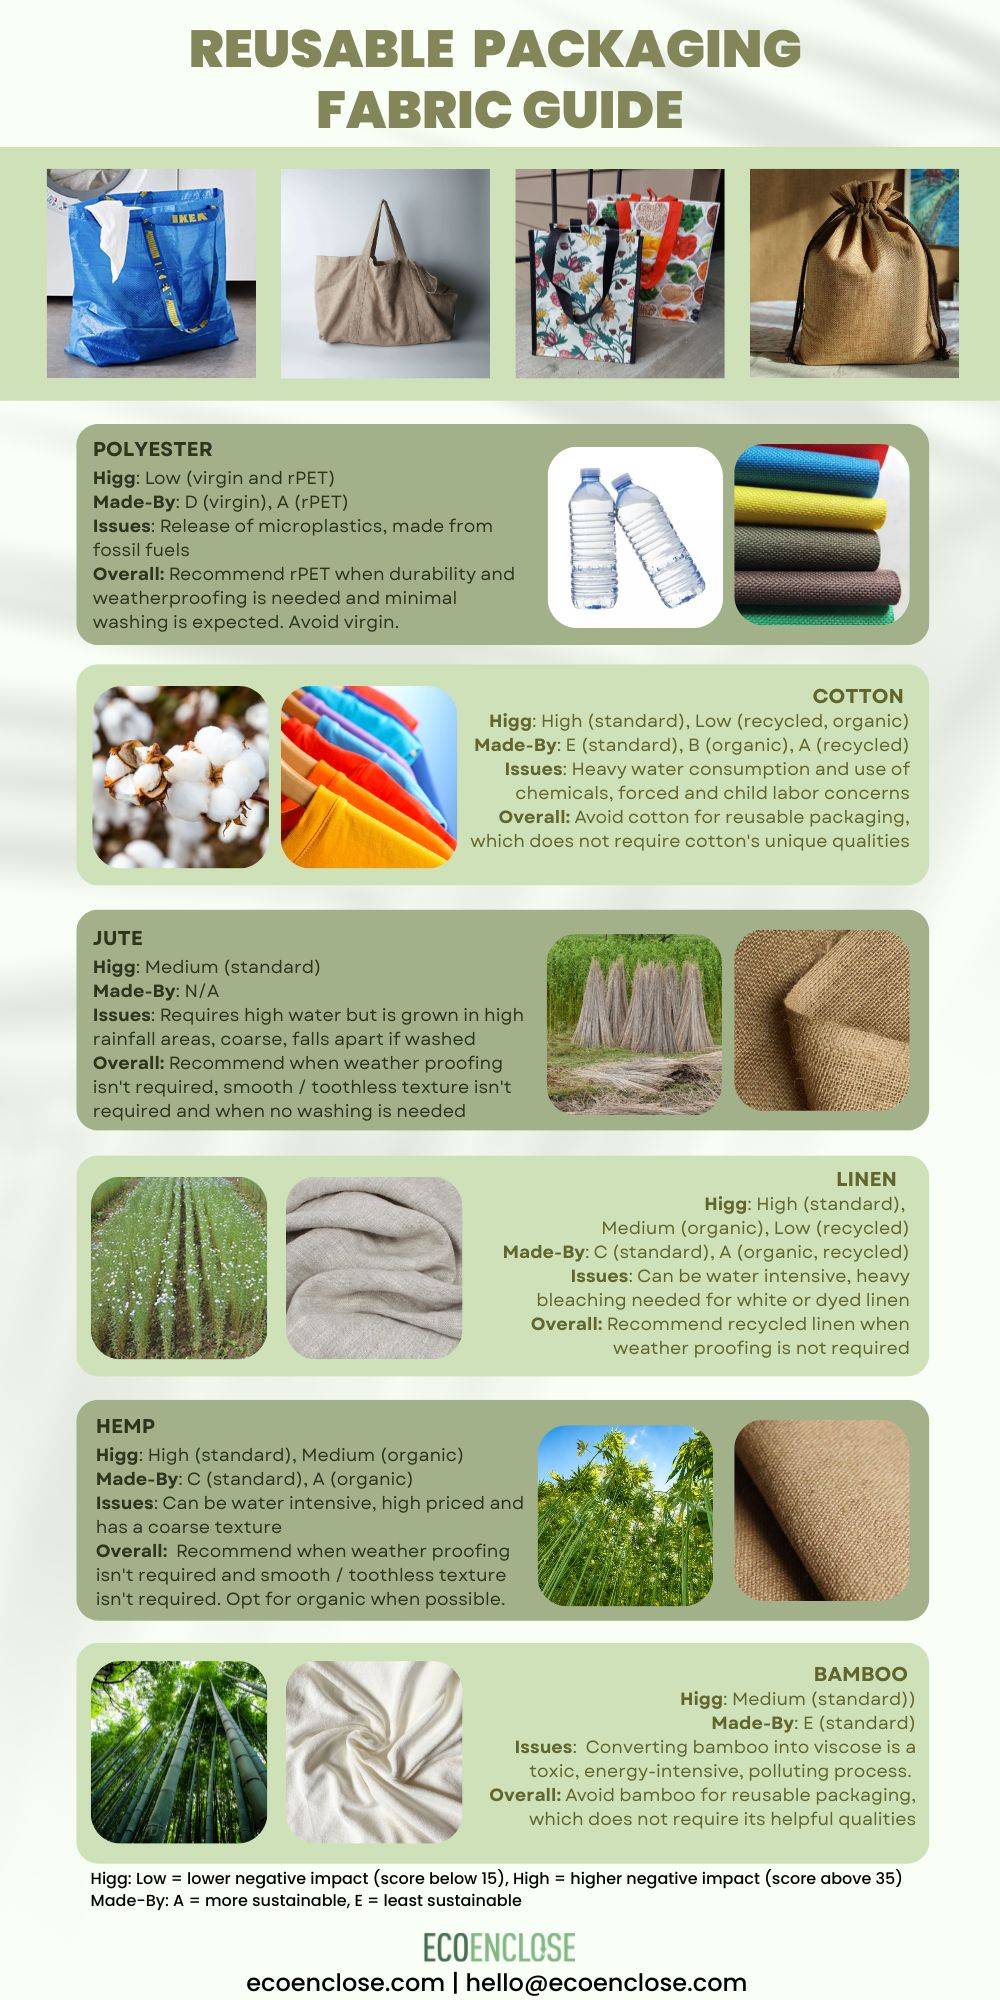 reusable packaging fabric guide by ecoenclose